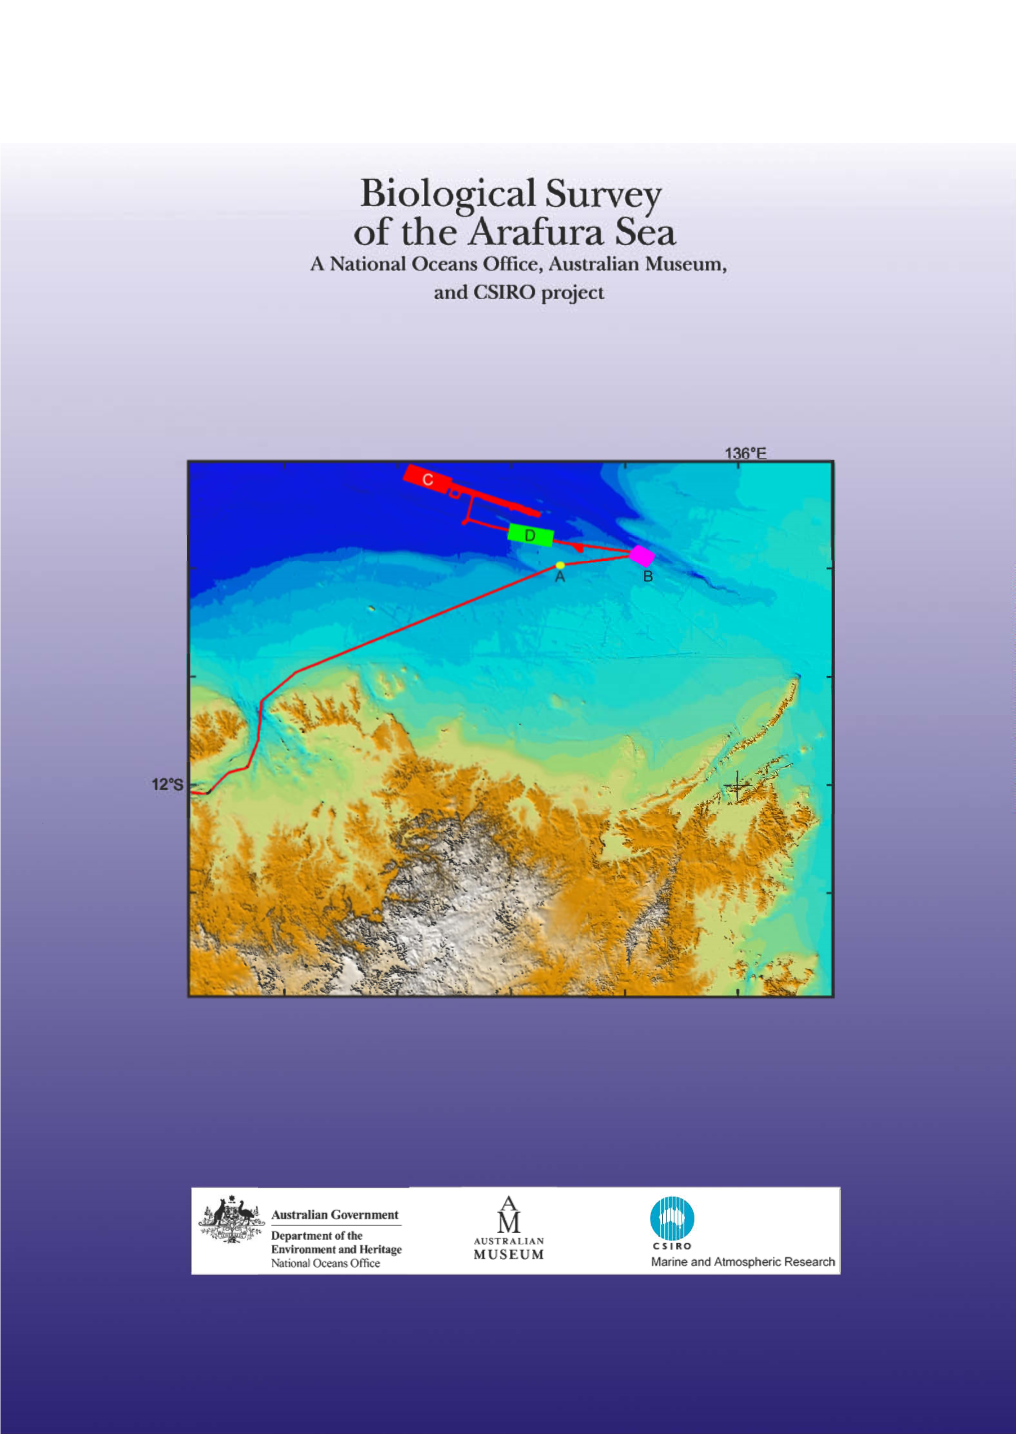 Biological Survey of the Arafura Sea, a 2-Person Team Collected 107 Samples from 56 Stations on Southern Surveyor Voyage 05 of May 2005